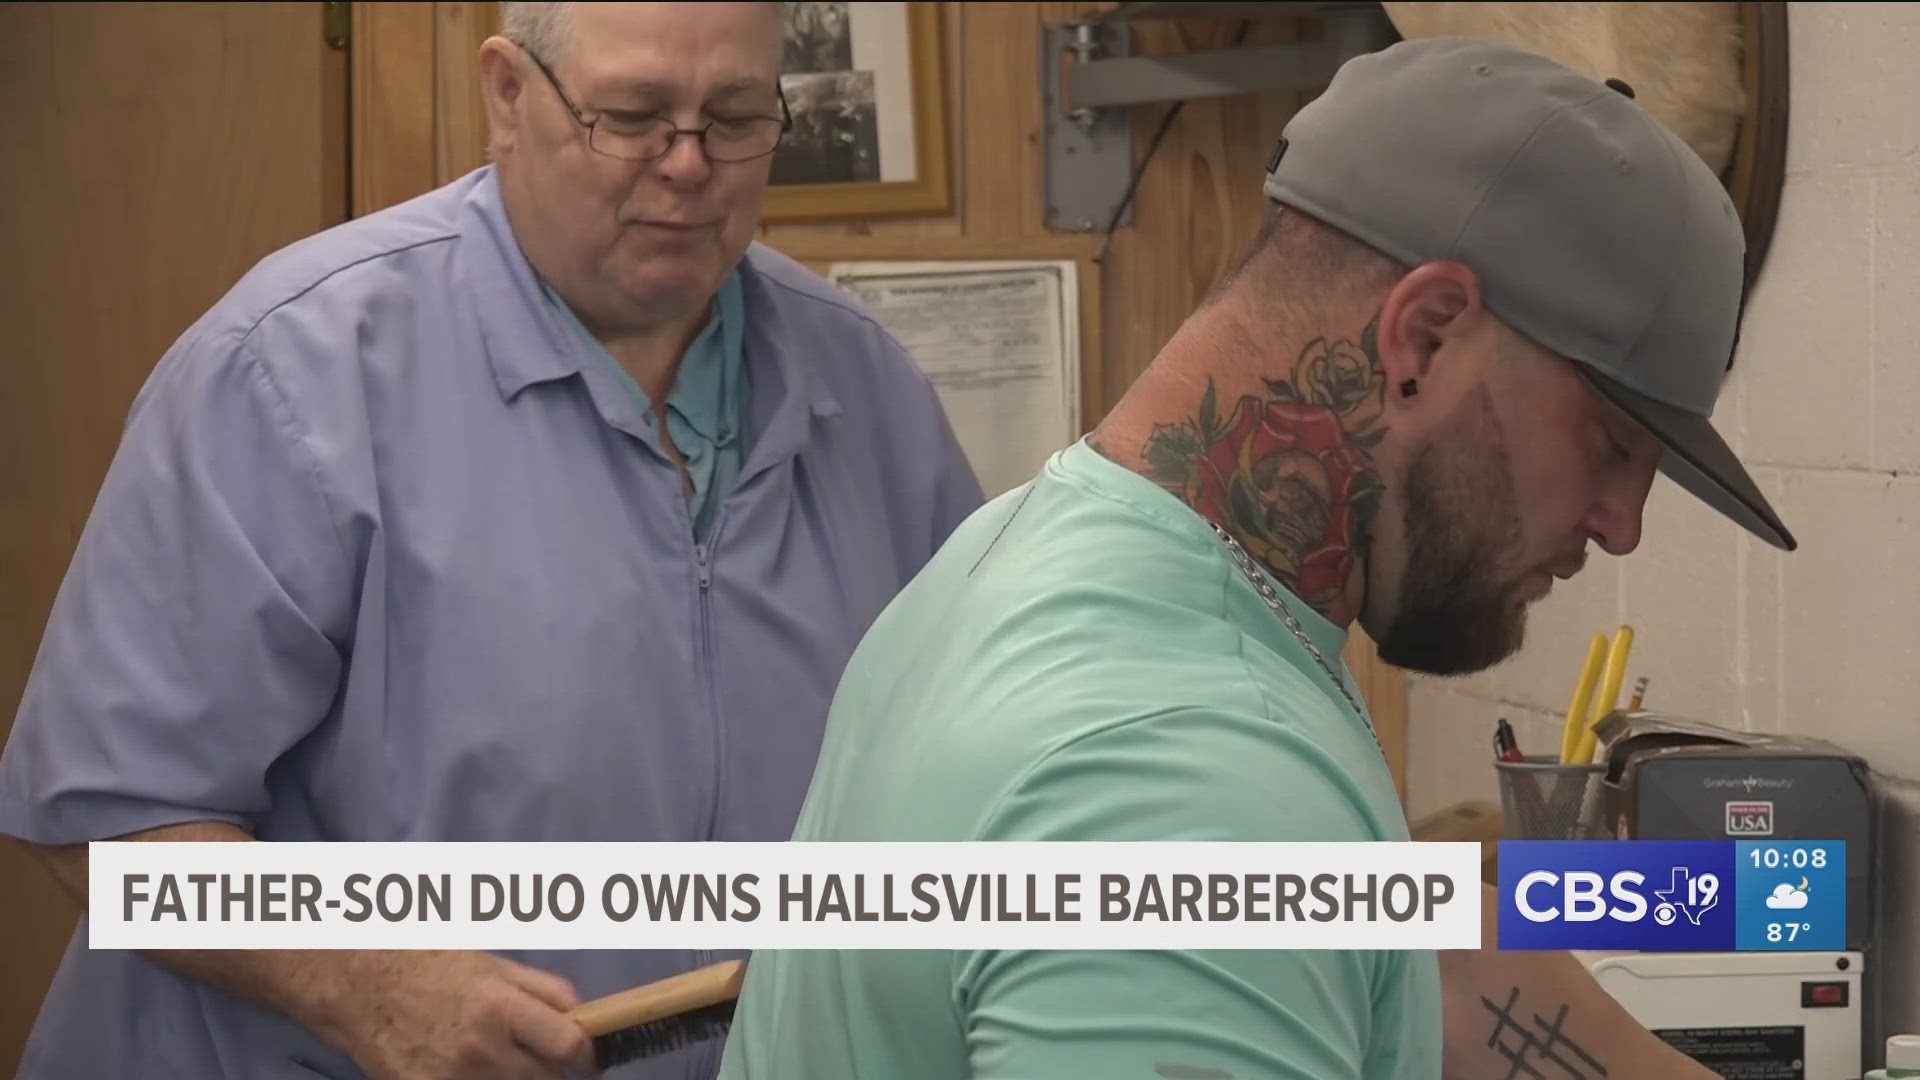 Father-son duo owns East Texas barbershop